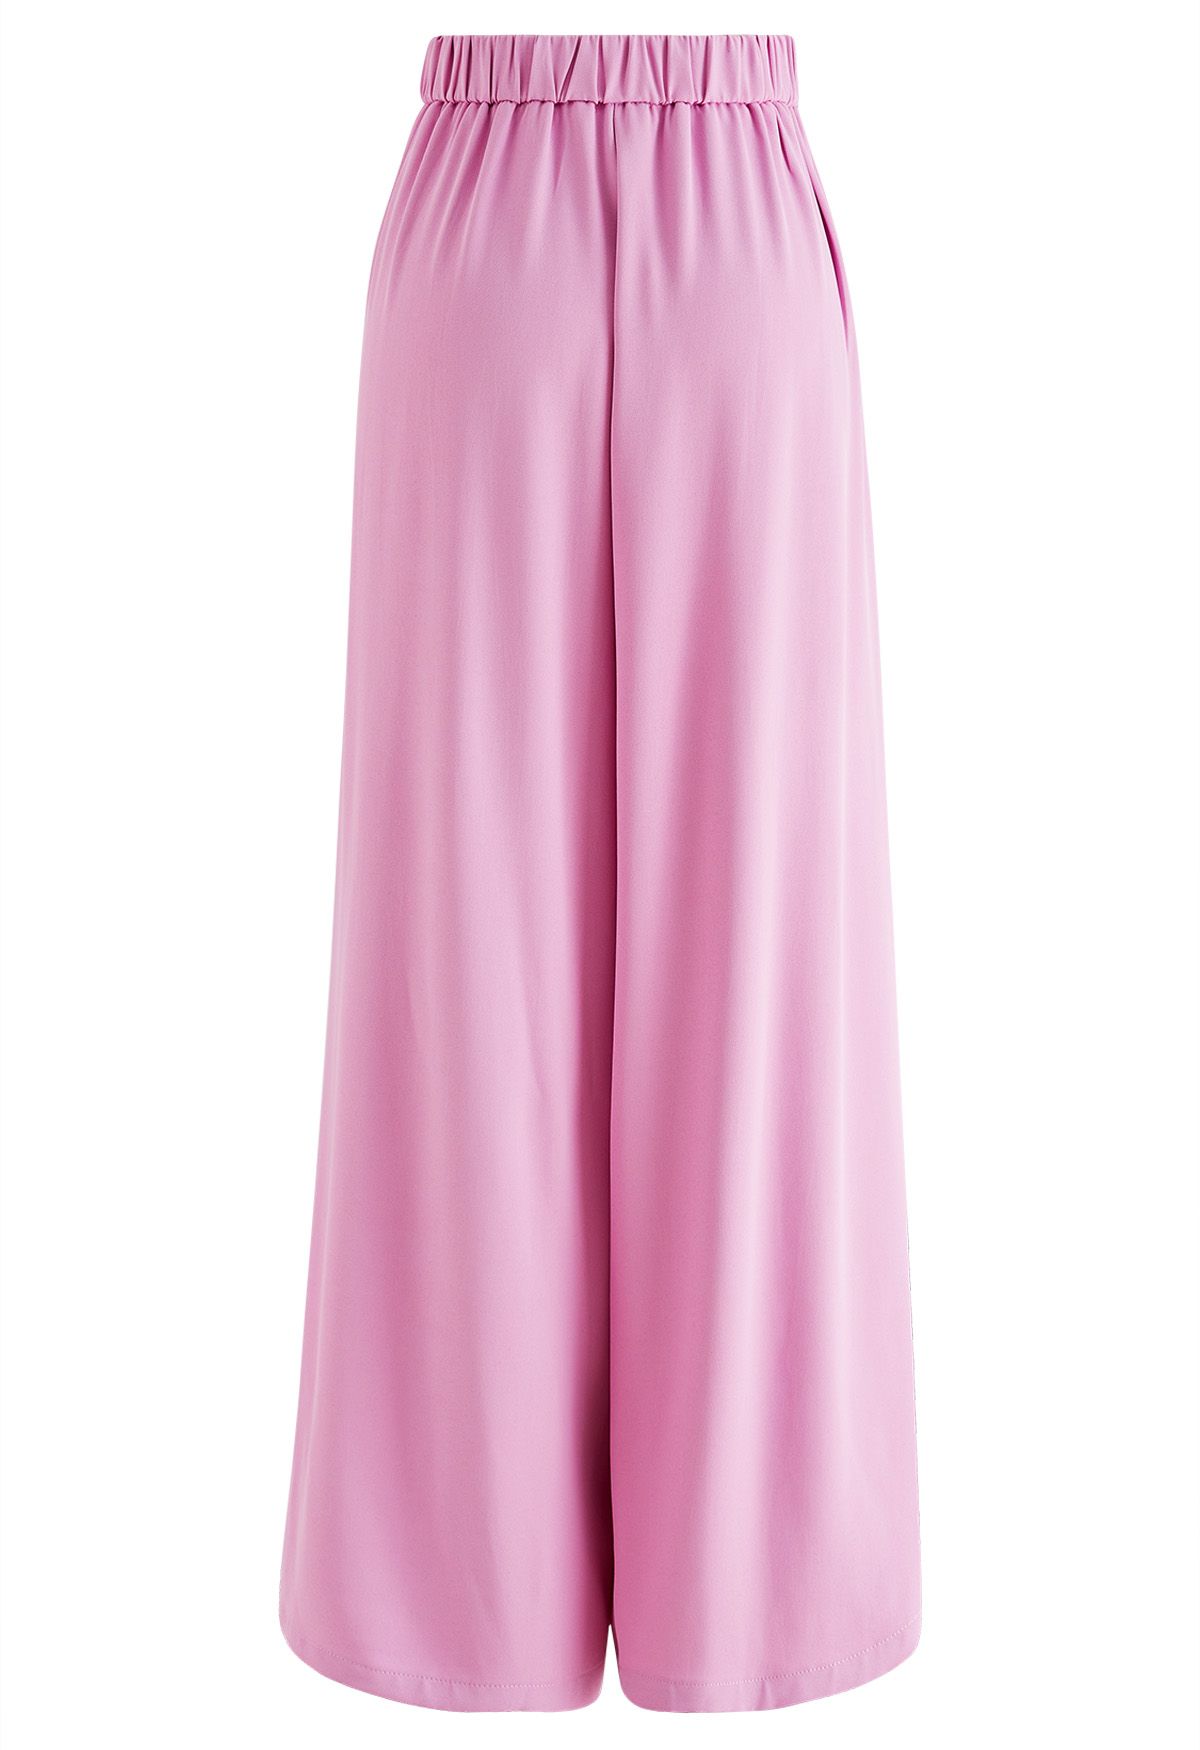 Asymmetric Pleated Chiffon Pull-On Wide-Leg Pants in Hot Pink - Retro,  Indie and Unique Fashion